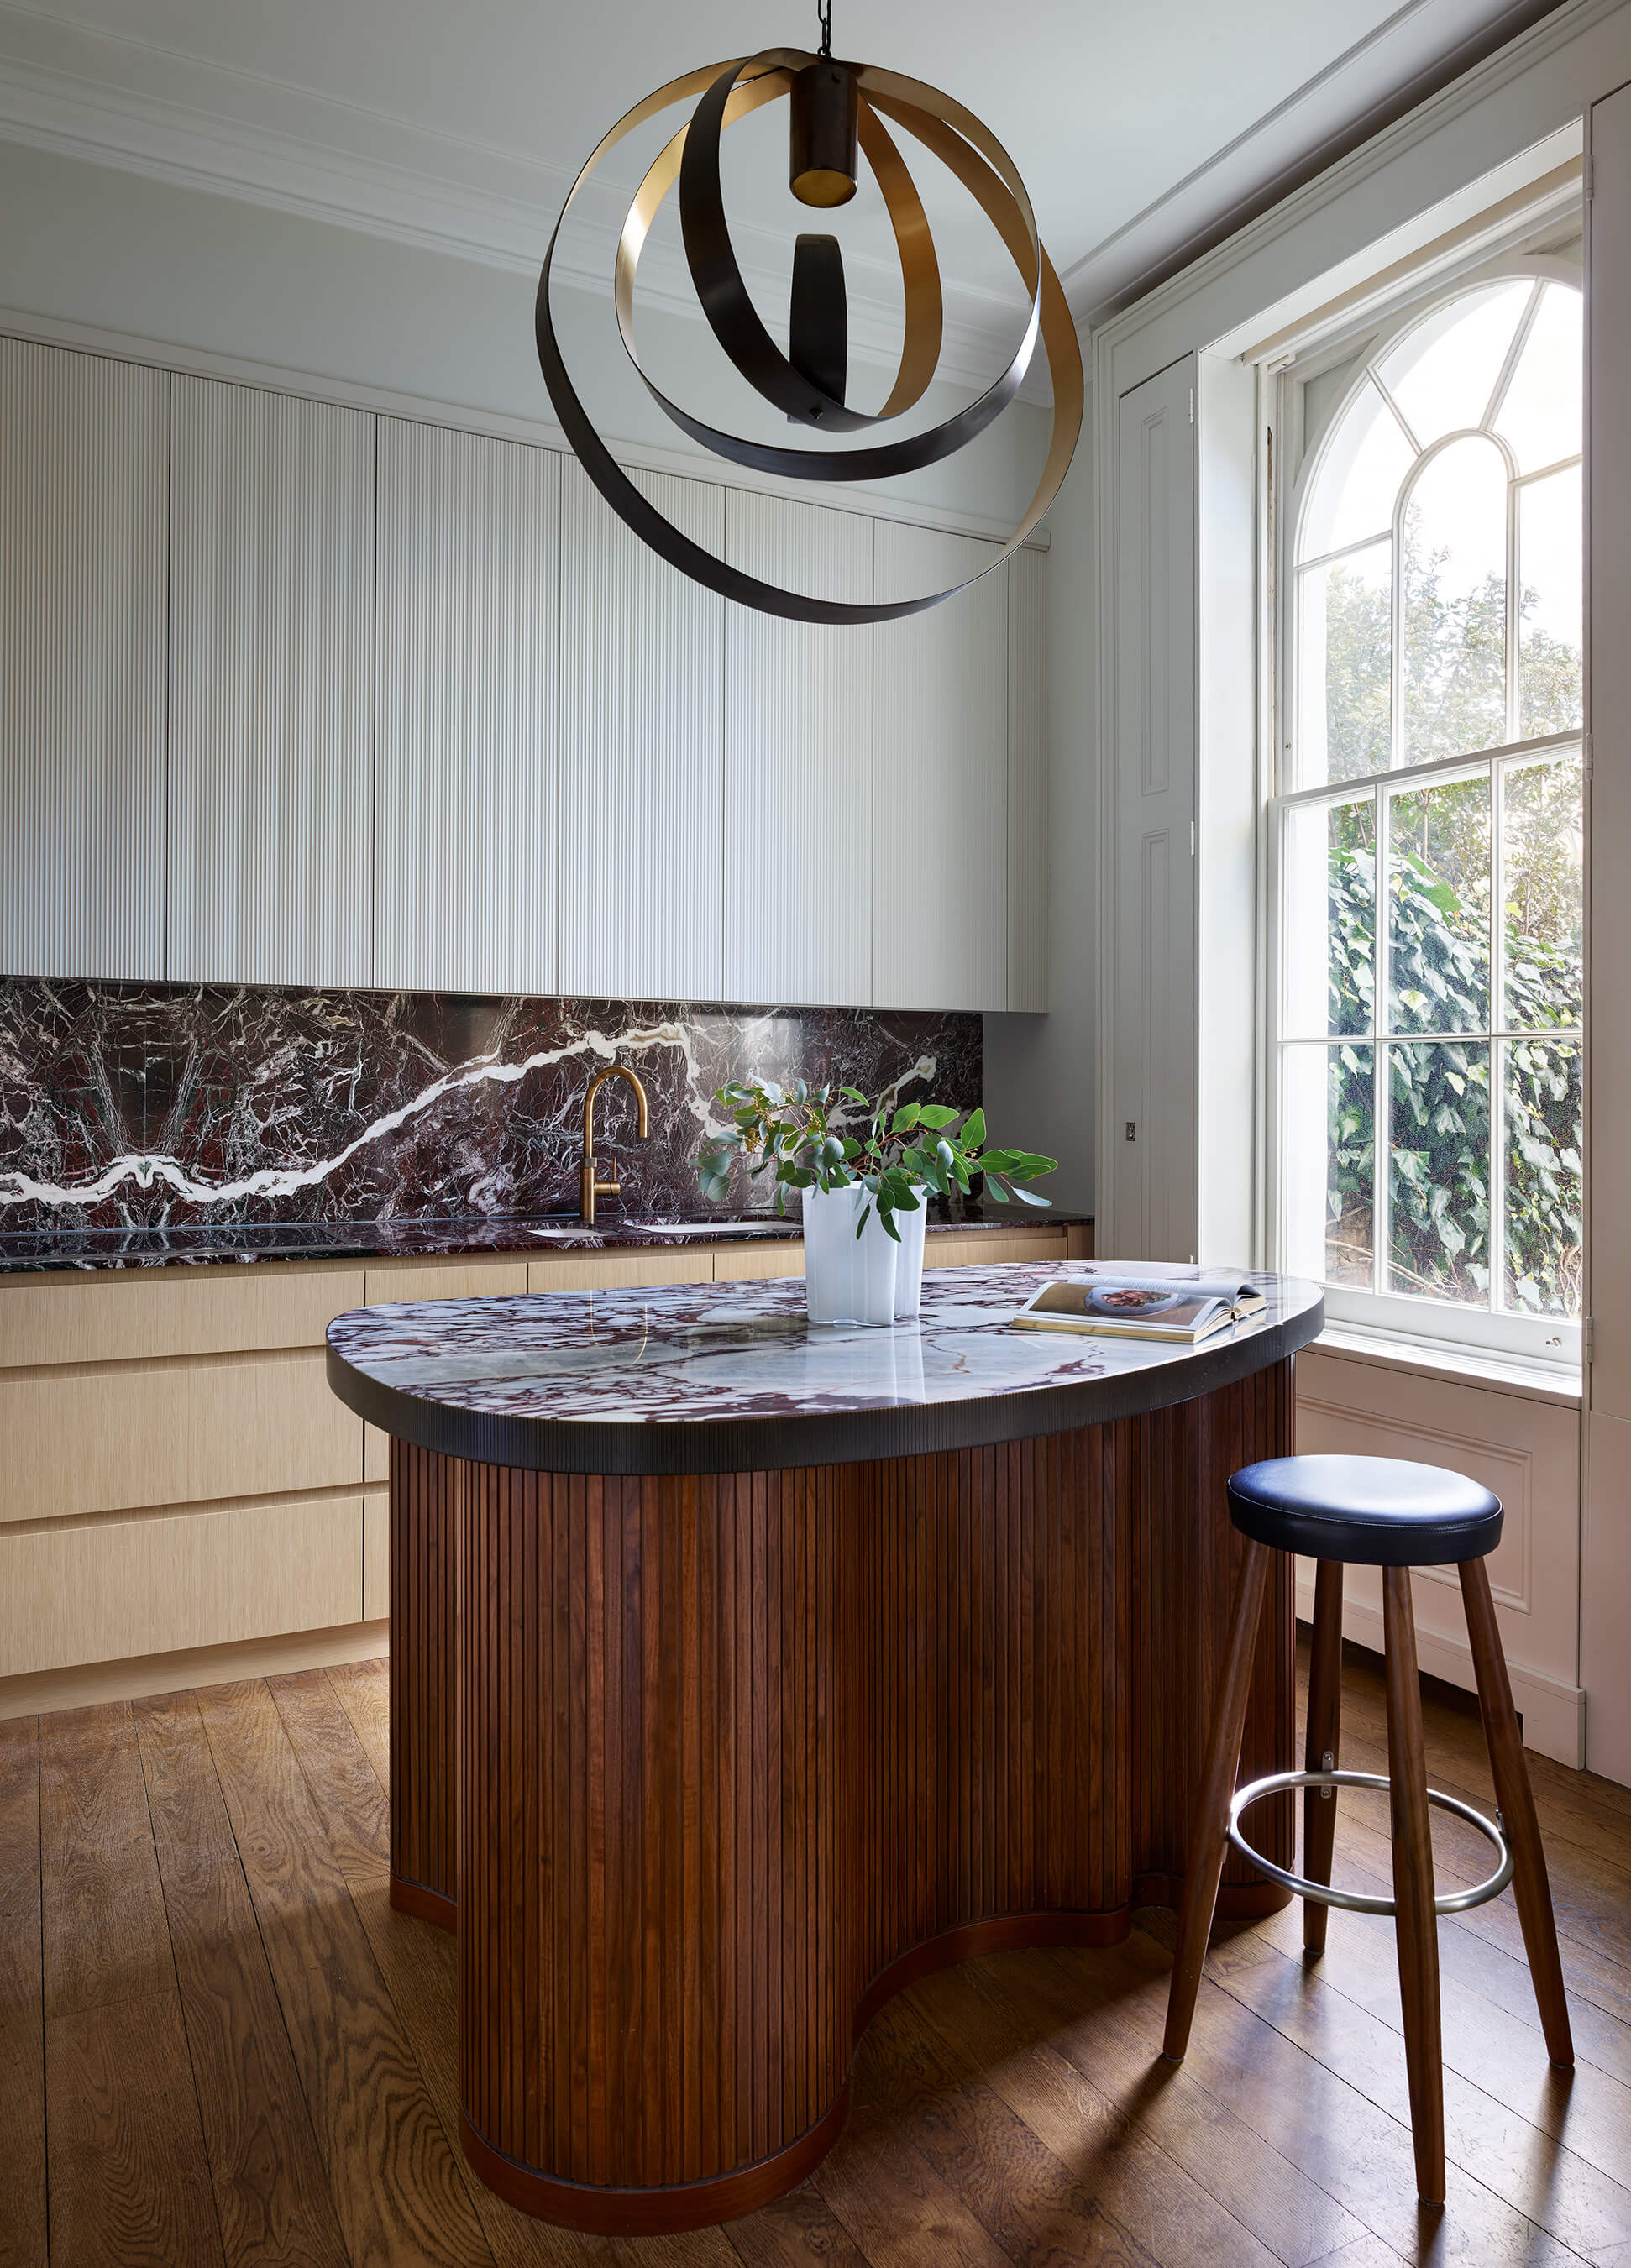 Angled view of a kitchen with a CTO pendant light and view through the window